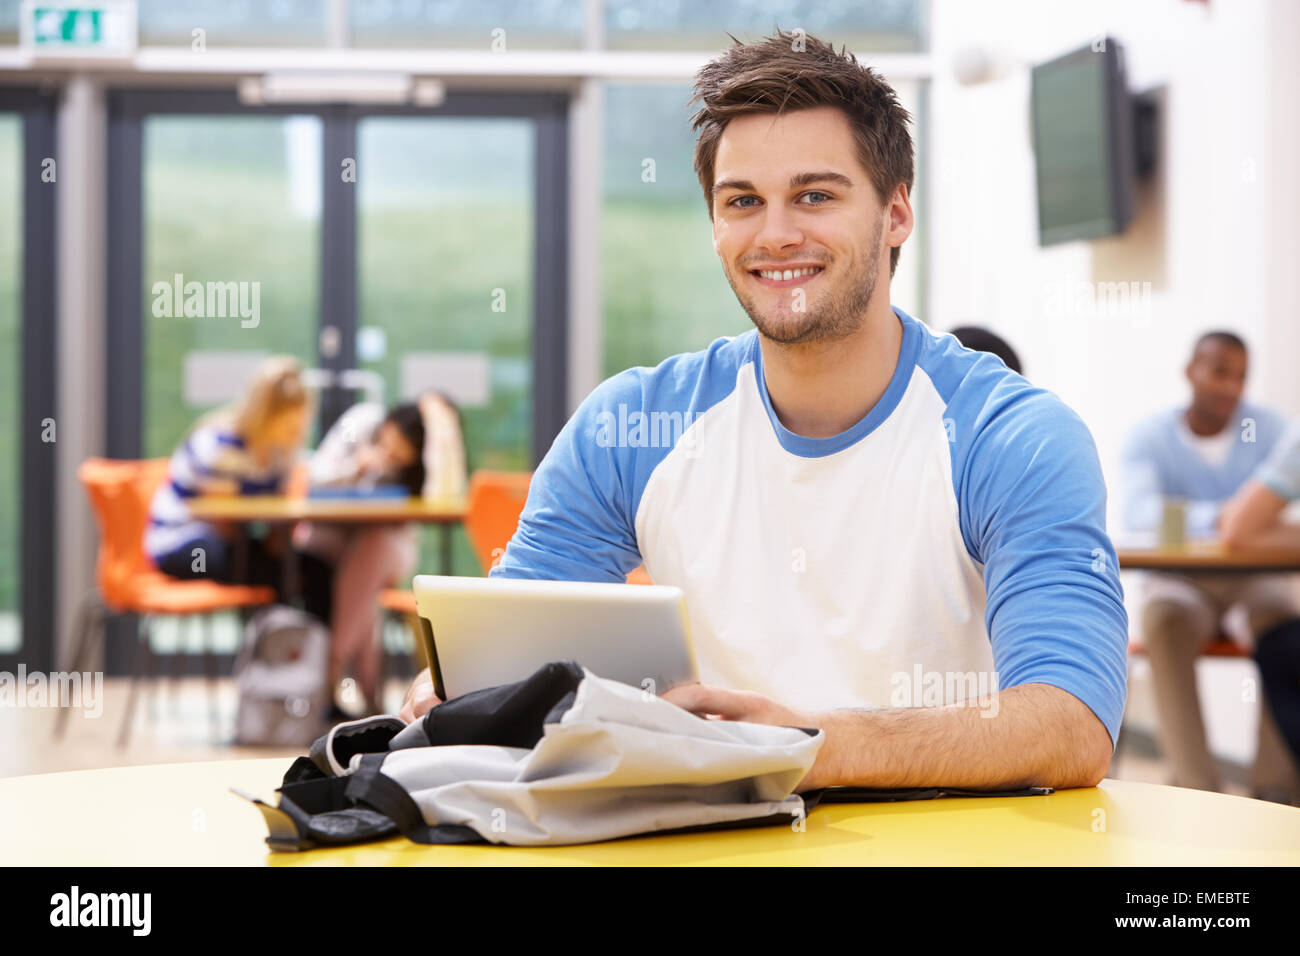 Male Student Studying In Classroom With Digital Tablet Stock Photo